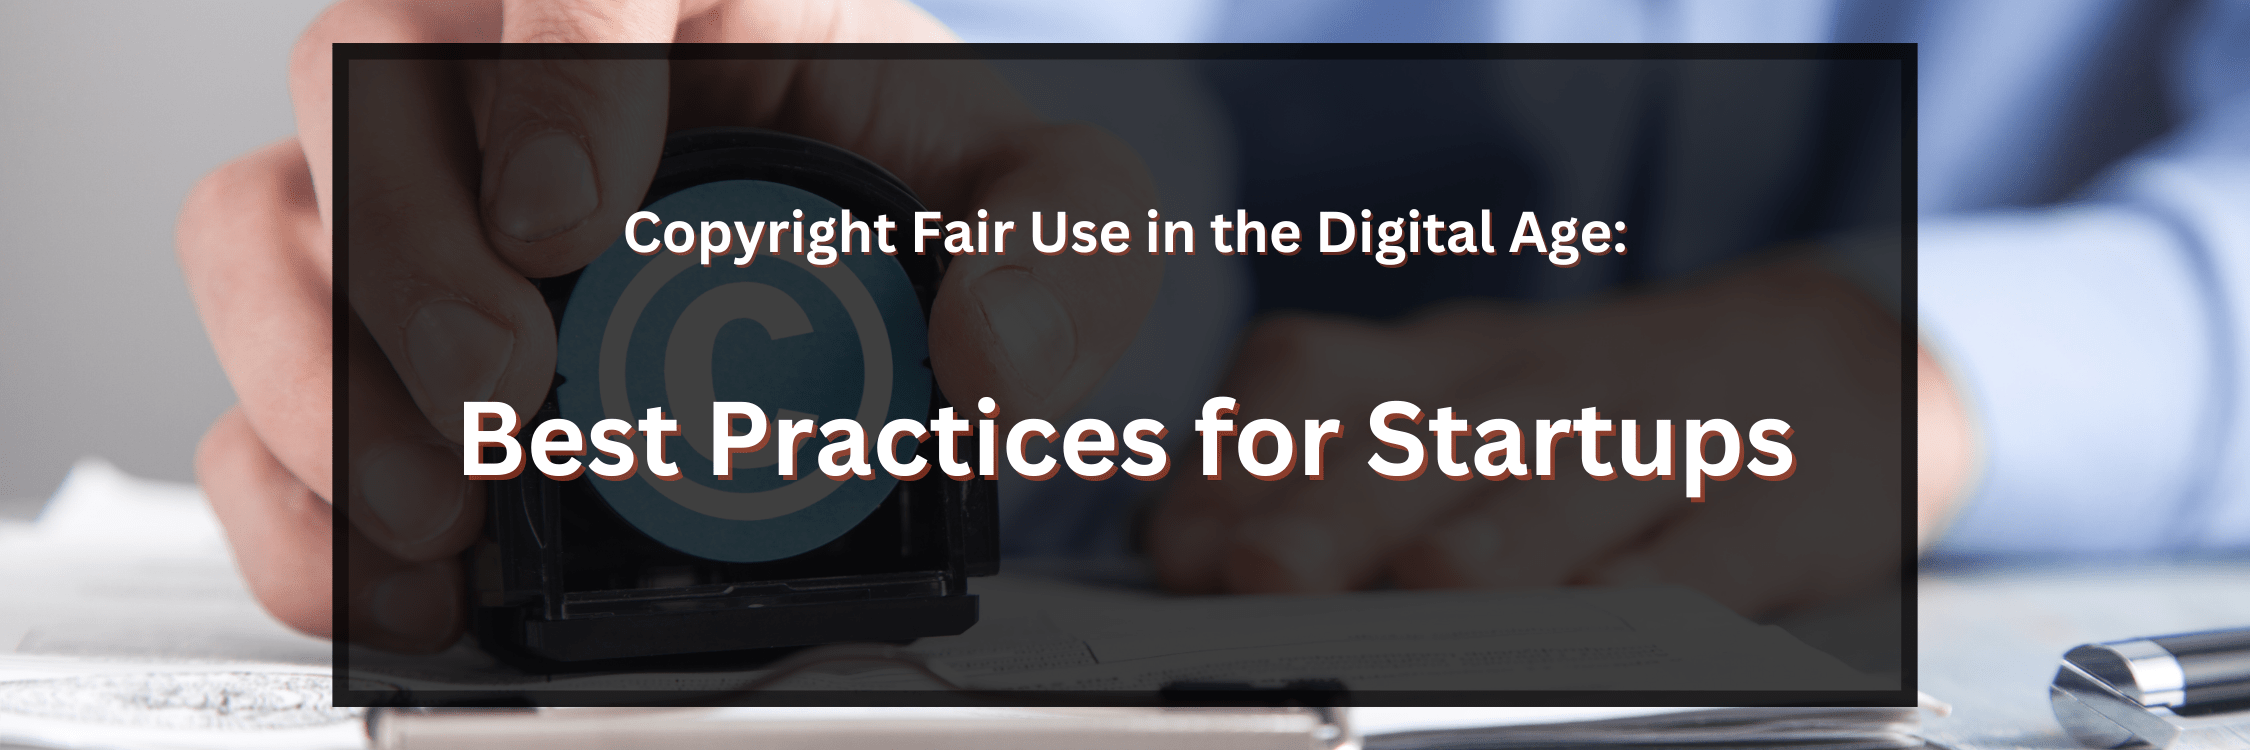 Copyright Fair Use in the Digital Age: Best Practices for Startups